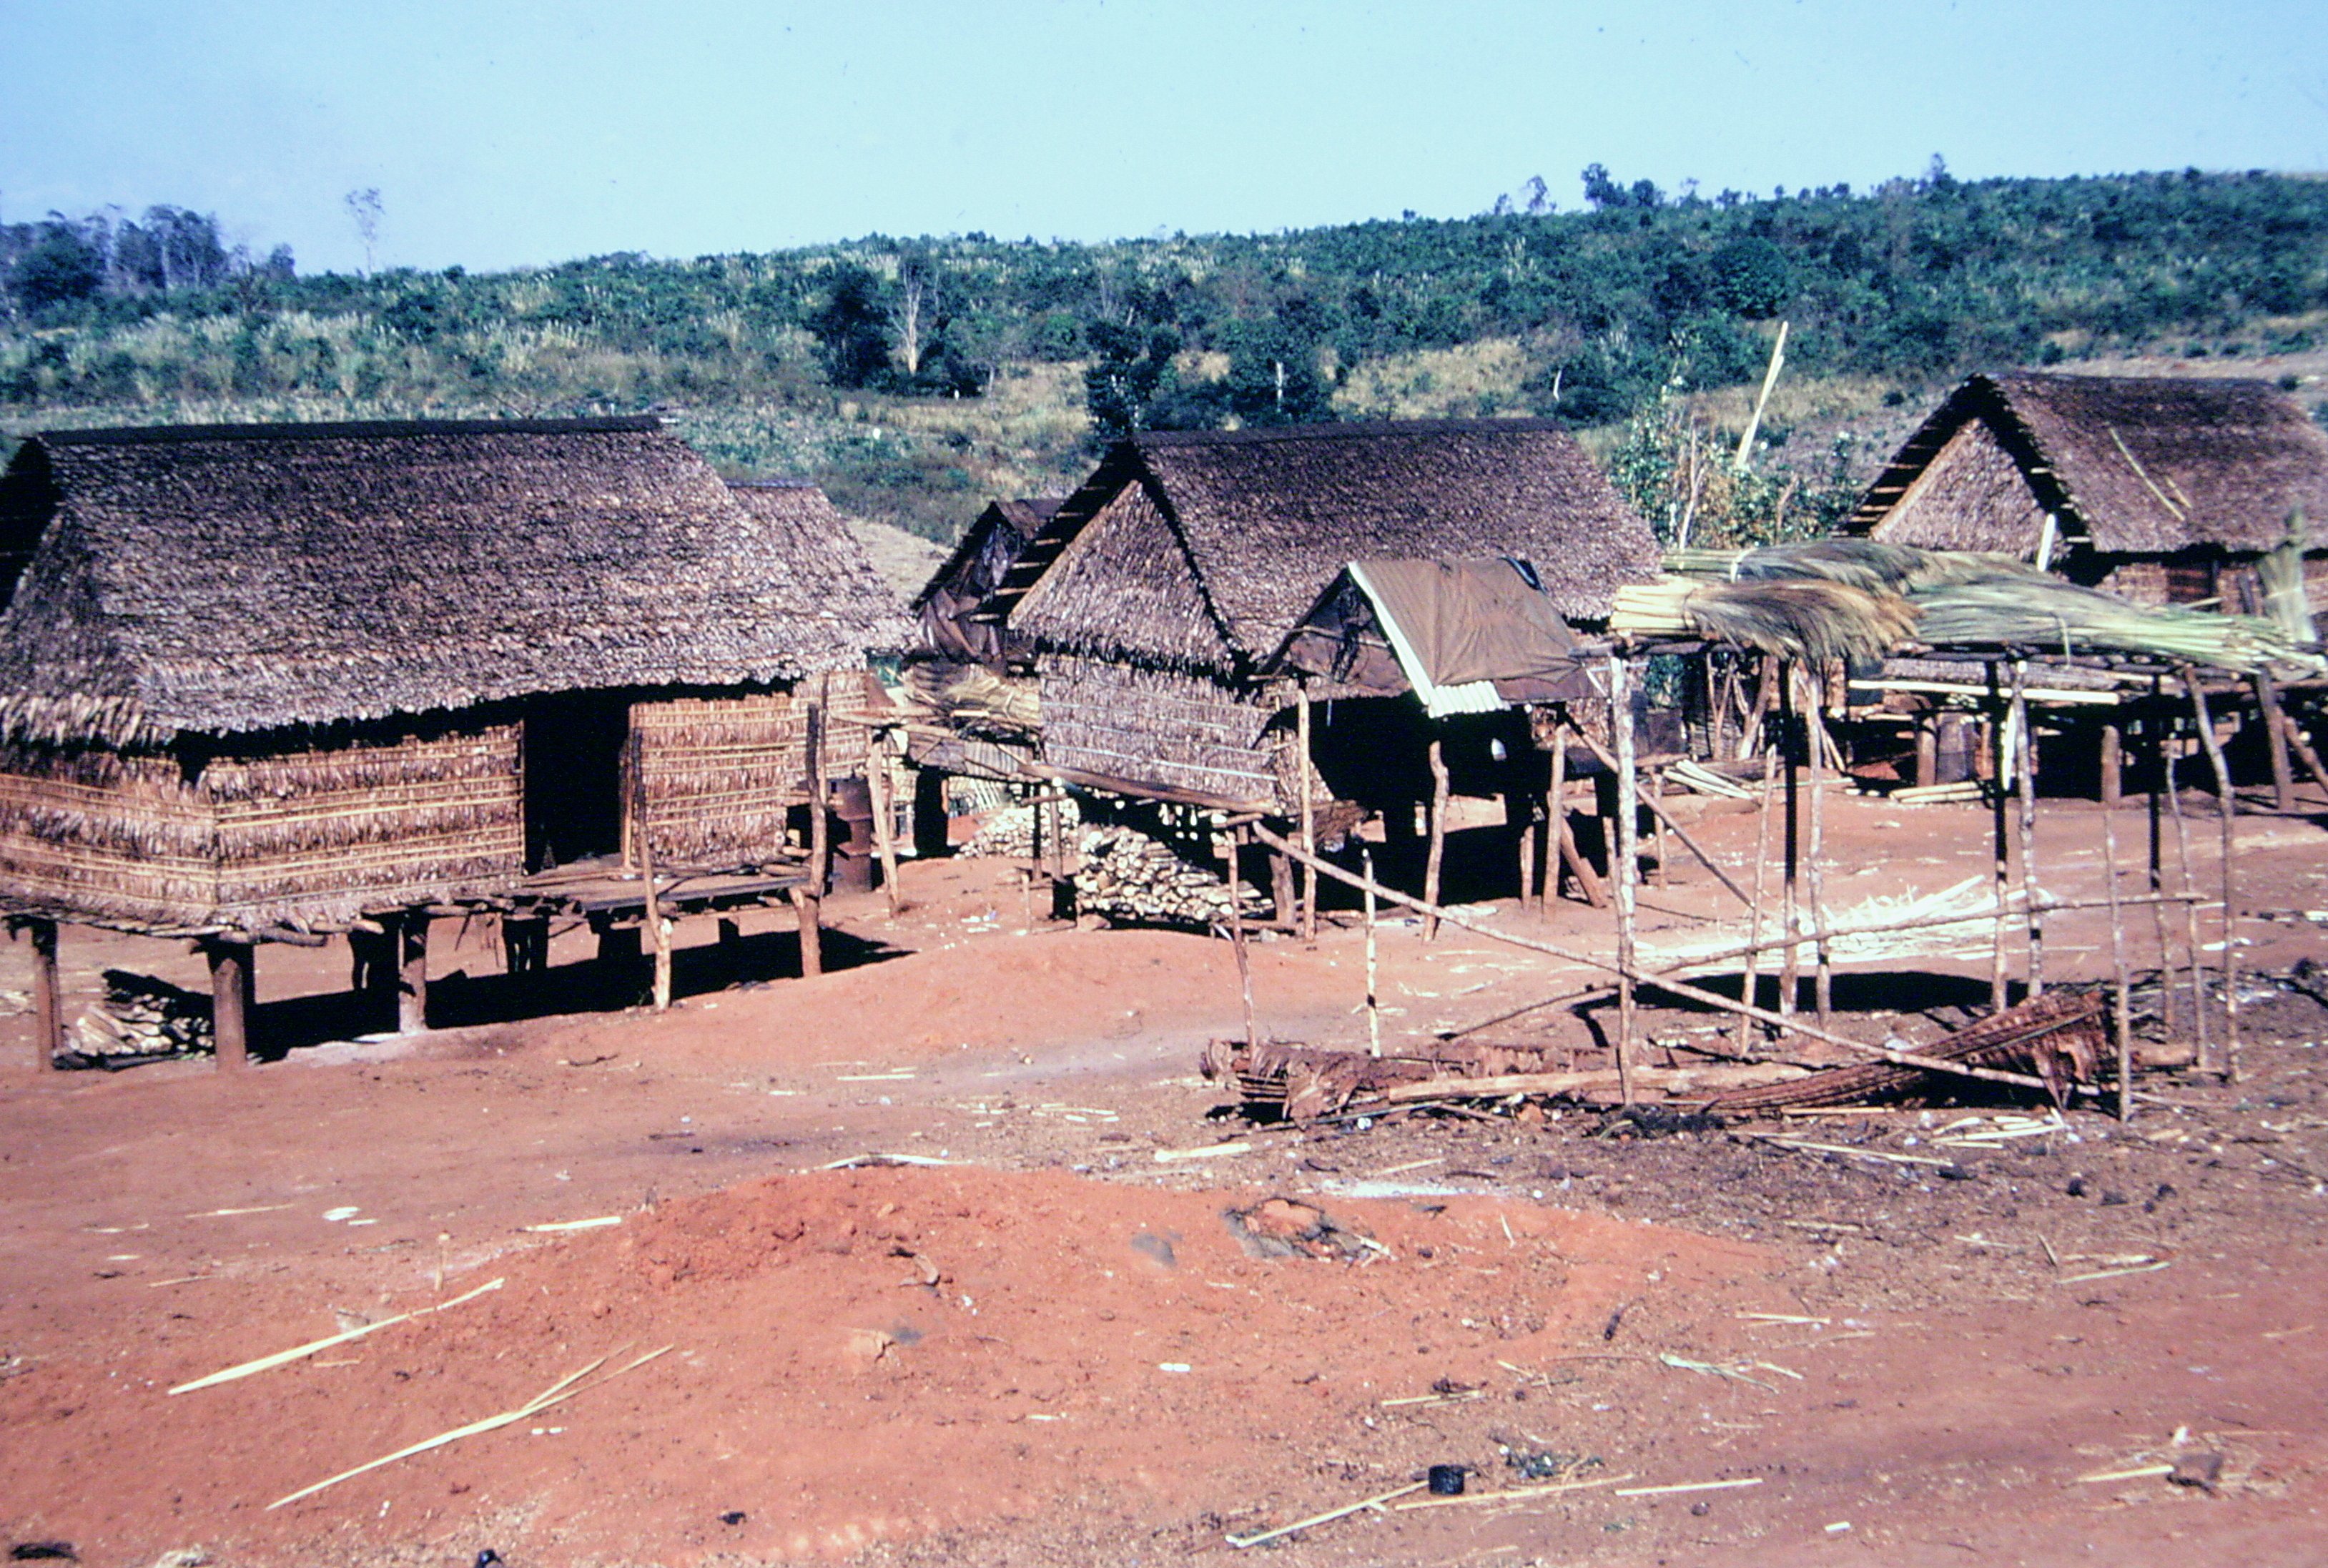 Thatched huts in a village.